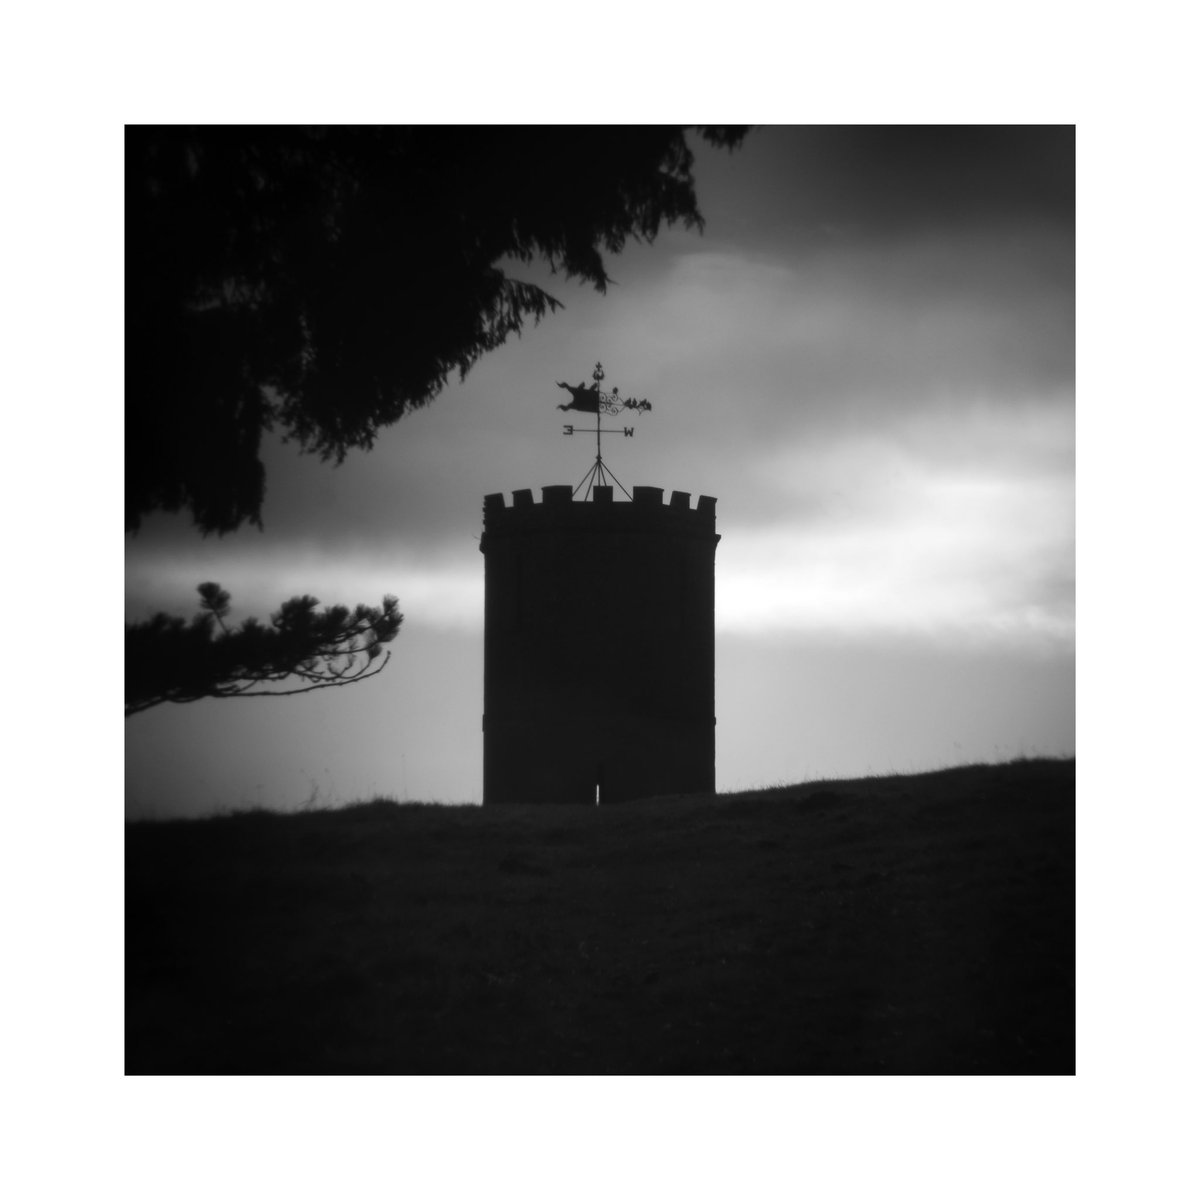 The Wroxton Dovecote No. 1, Oxfordshire 2023.

A Holga image from last November that I have only just gotten around to processing. 
#photography #monochrome #bnw